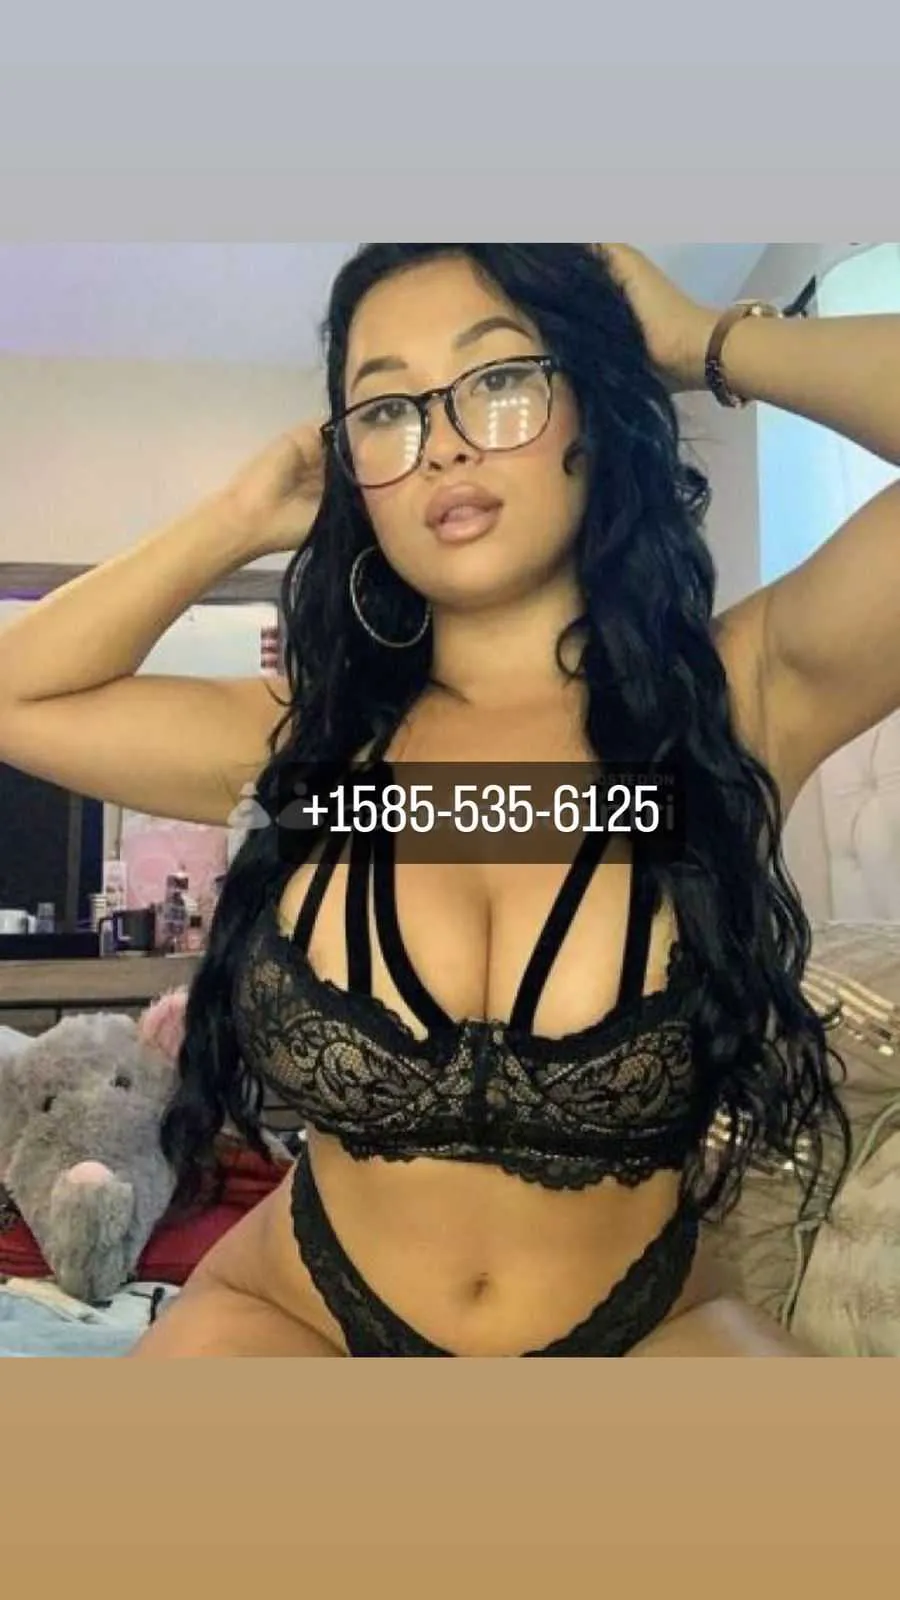 Reviews about escort with phone number 5855356125